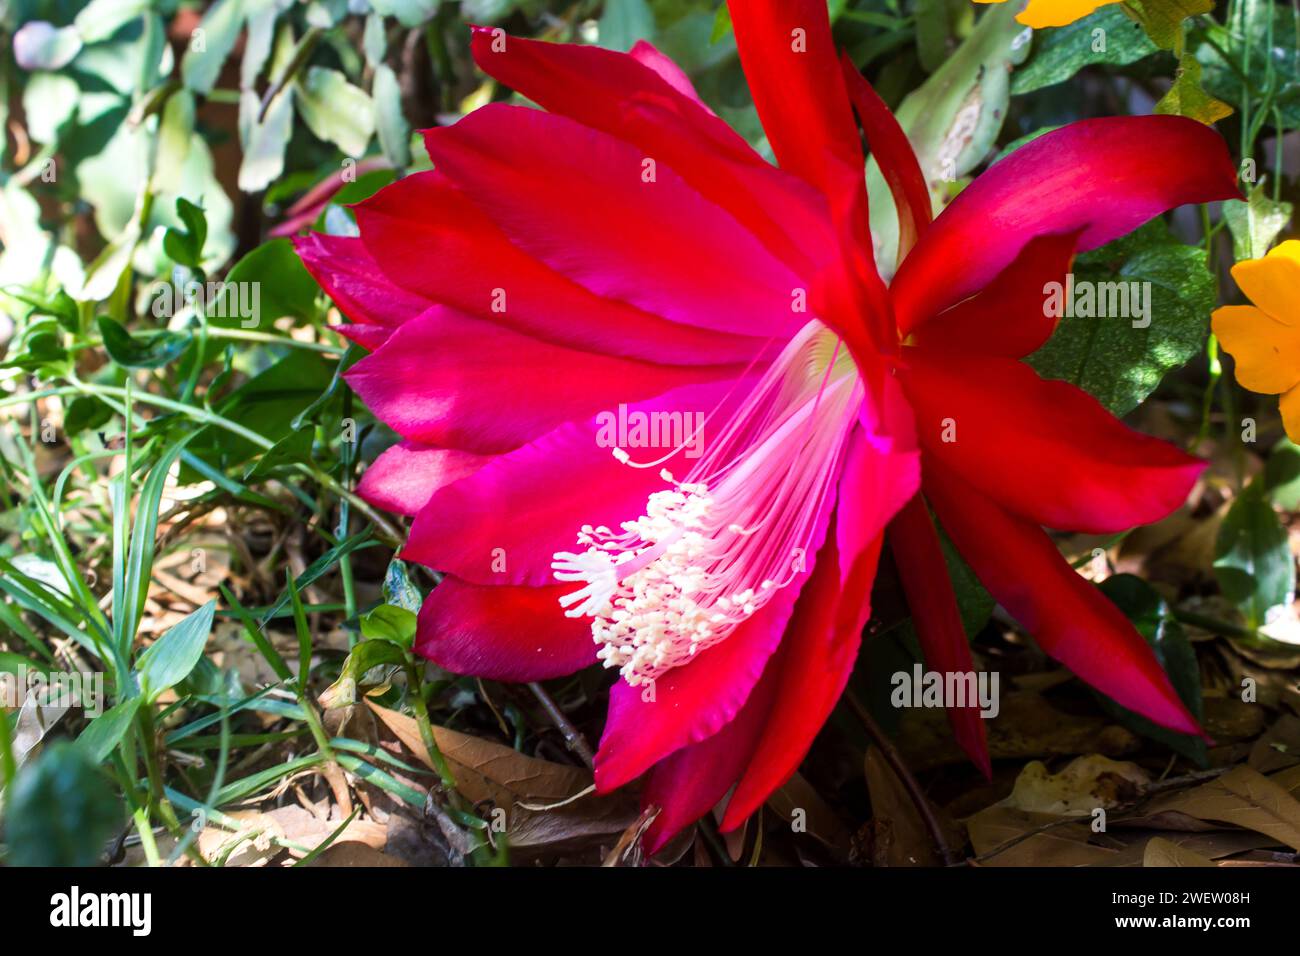 The Gorgeous scarlet flower of an Orchid Cactus Stock Photo